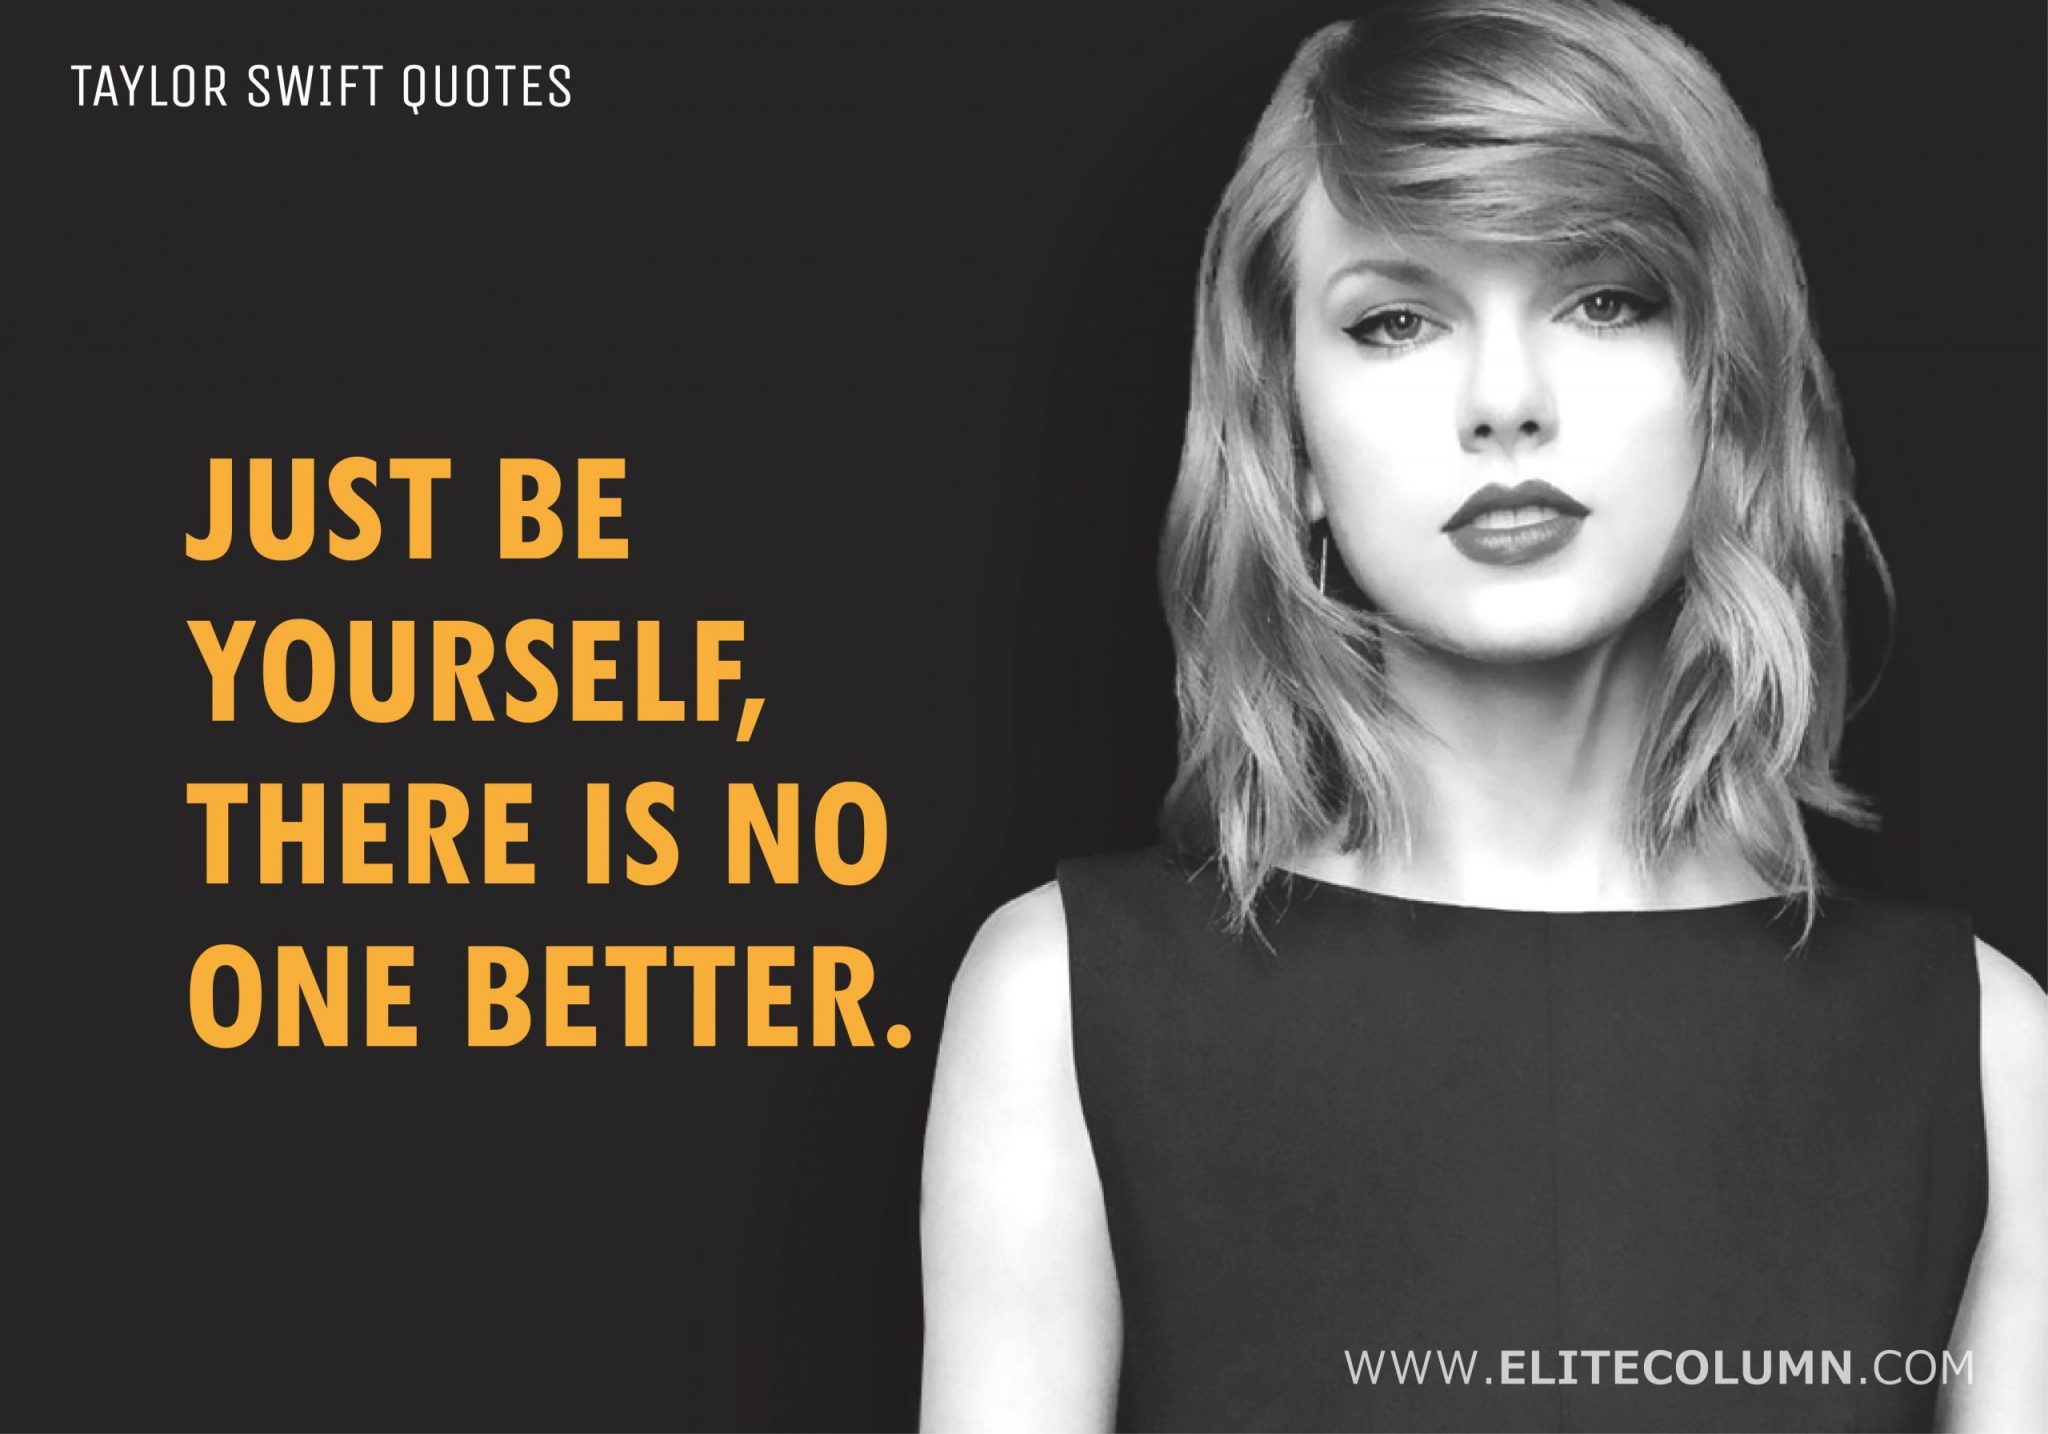 Taylor Swift Quotes 3 1 Scaled 